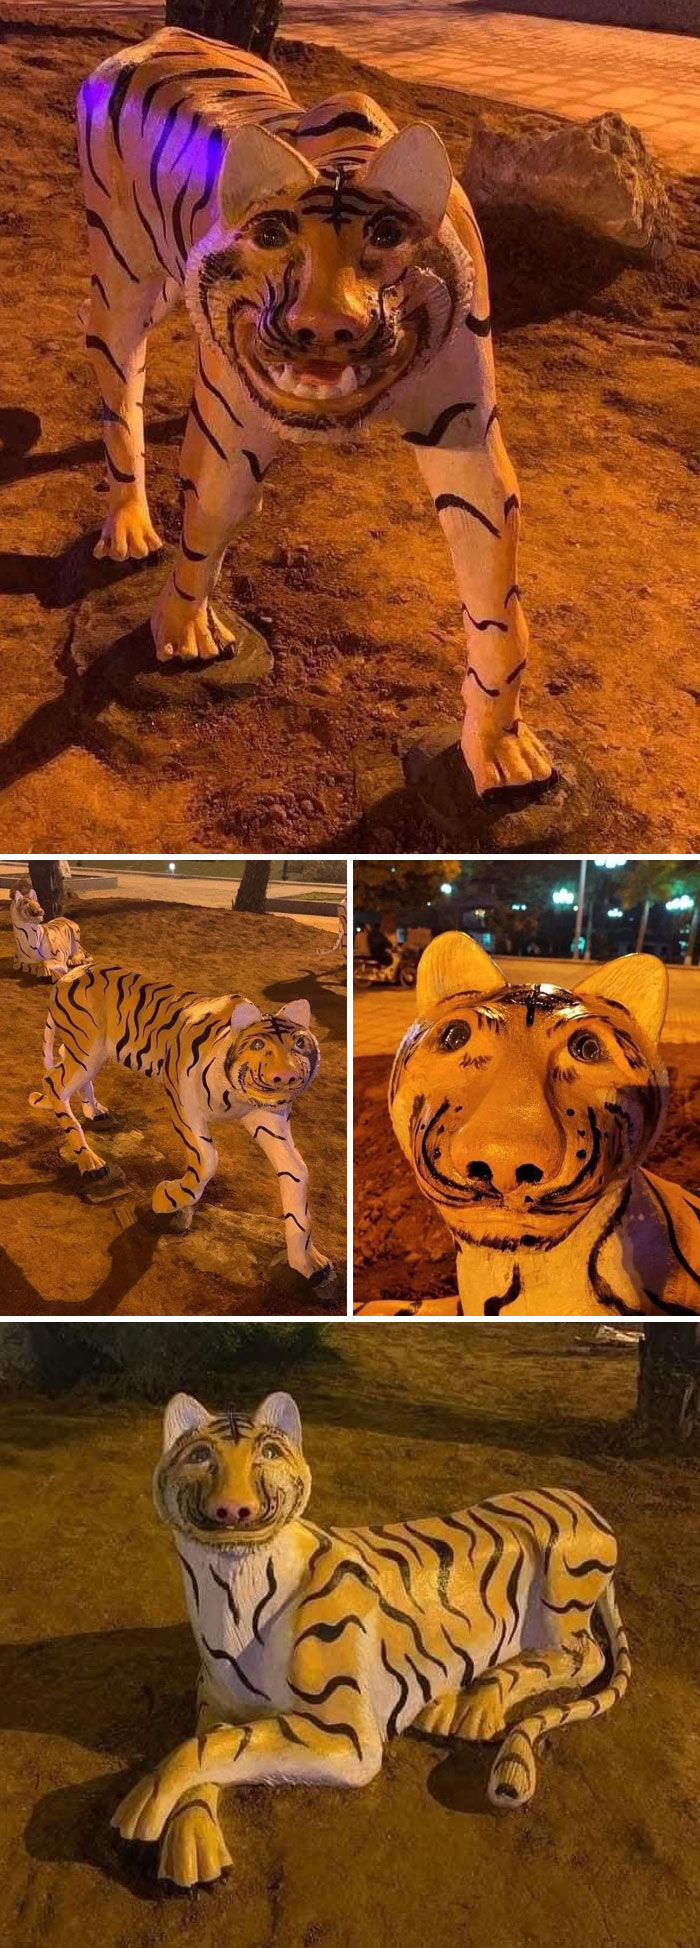 These Poorly-Made Tiger Sculptures At Night